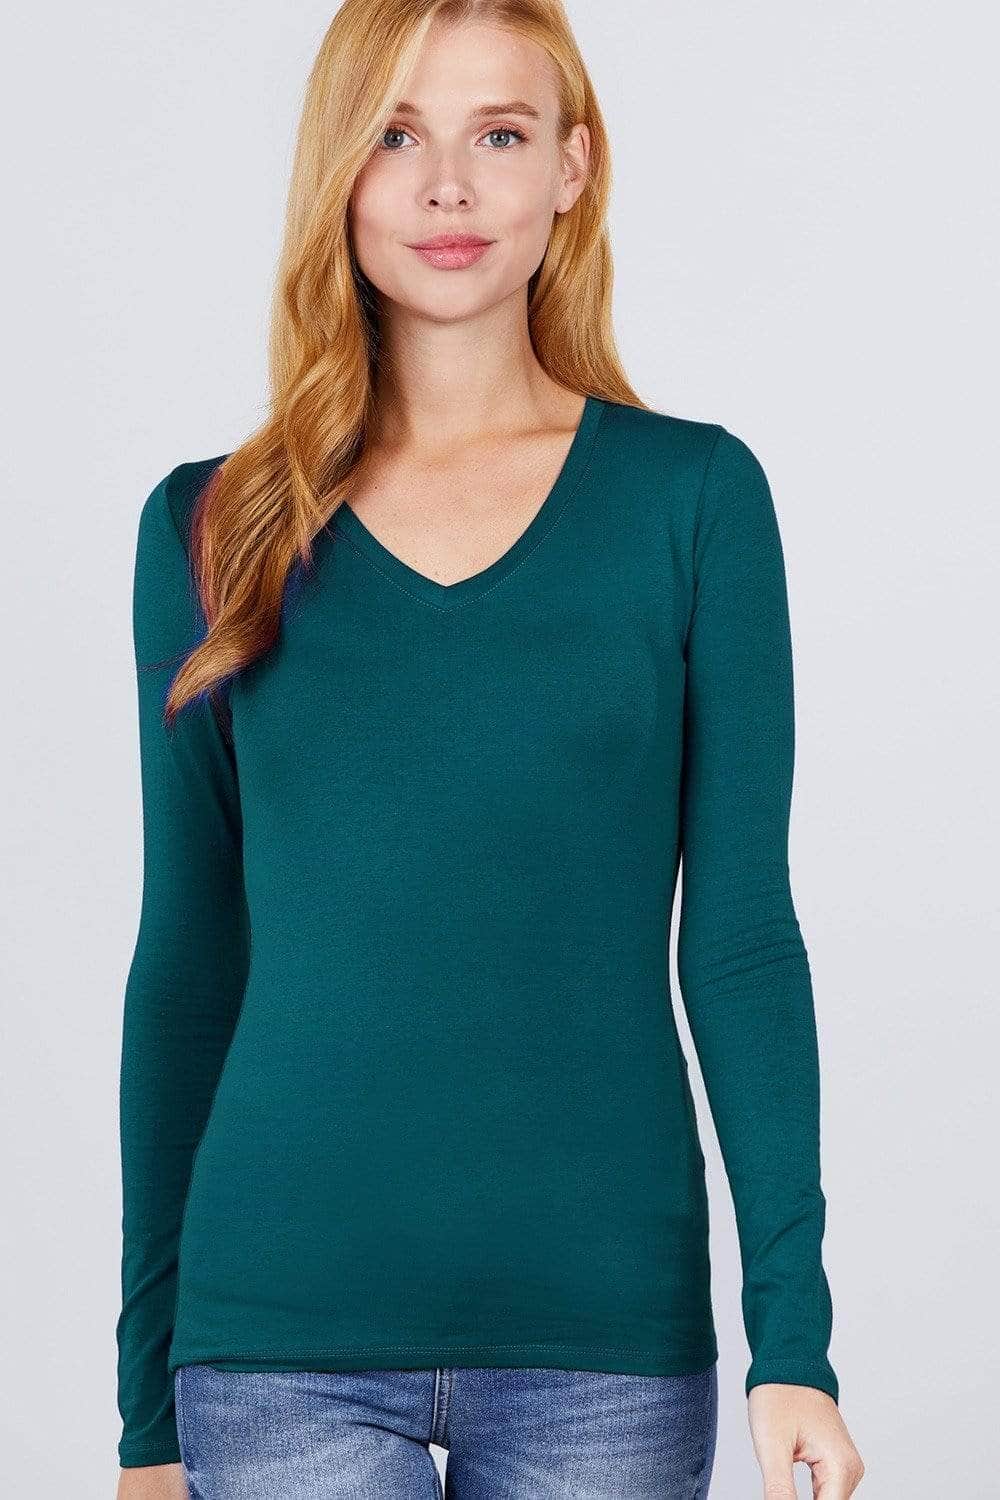 Cotton Jersey V-neck Top-TOPS / DRESSES-[Adult]-[Female]-Winter Teal-S-Blue Zone Planet